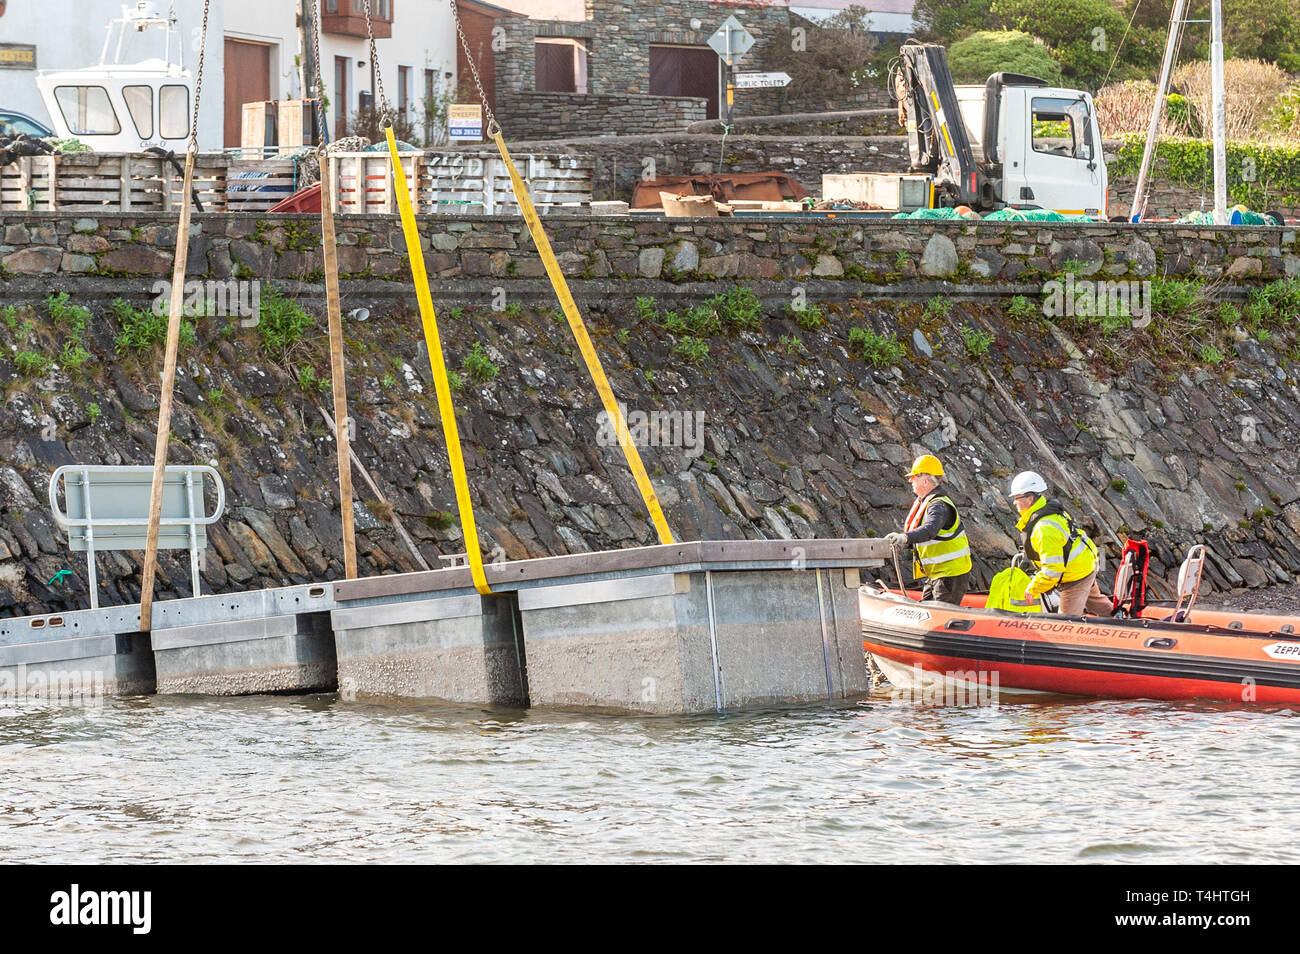 Schull, West Cork, Ireland. 16th Apr, 2019. West Cork Civil Engineering were given the task of refloating the €600,000 Schull pontoon, ready for the season.  Workers are seen lifting a piece of the pontoon into the water, ready to be floated into position. Credit: Andy Gibson/Alamy Live News. Stock Photo